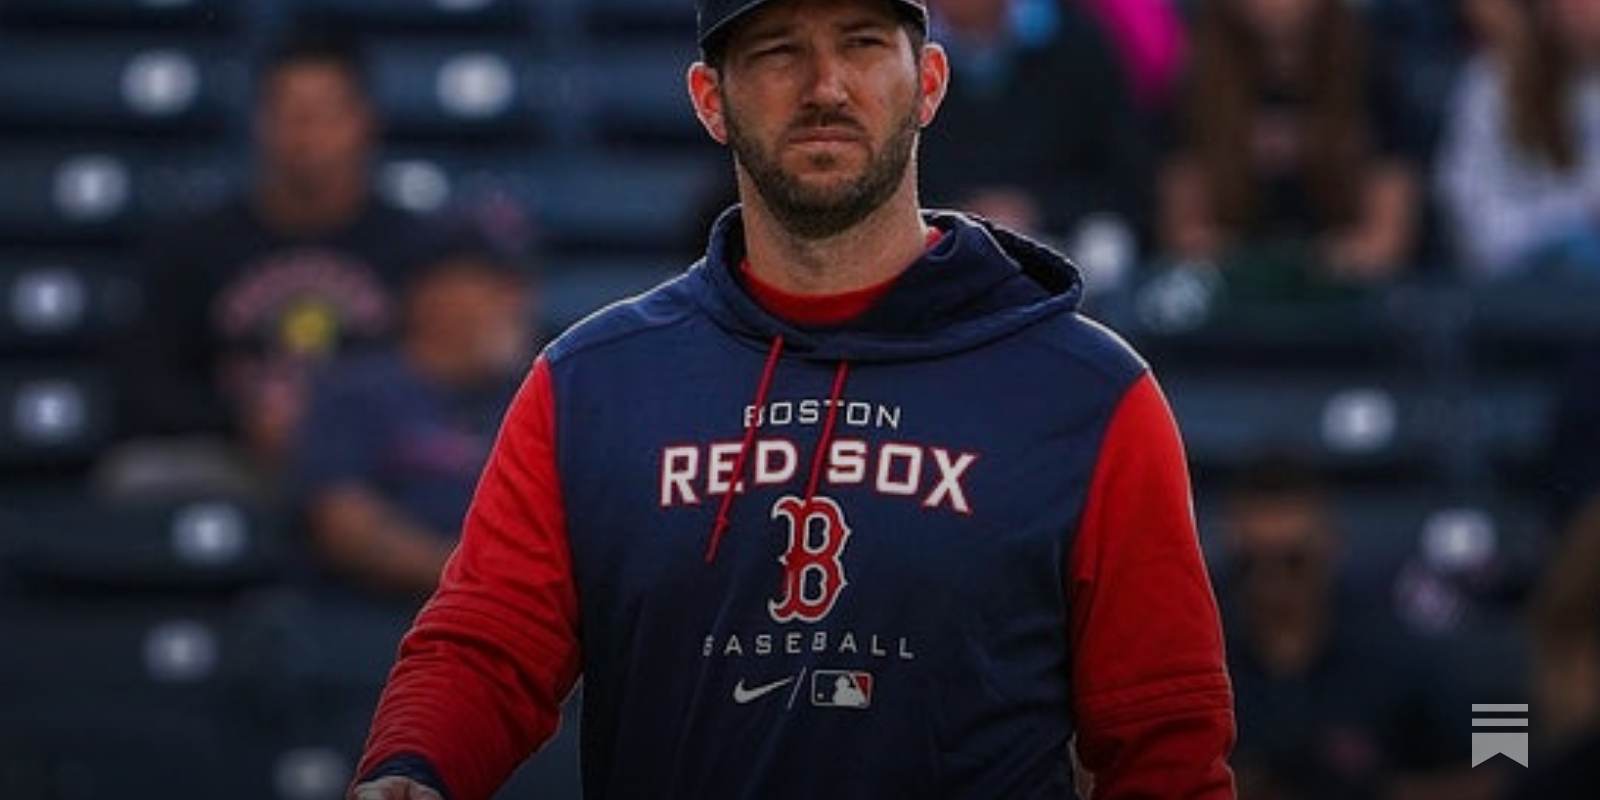 Get to know Worcester Red Sox manager Chad Tracy beyond just the bench